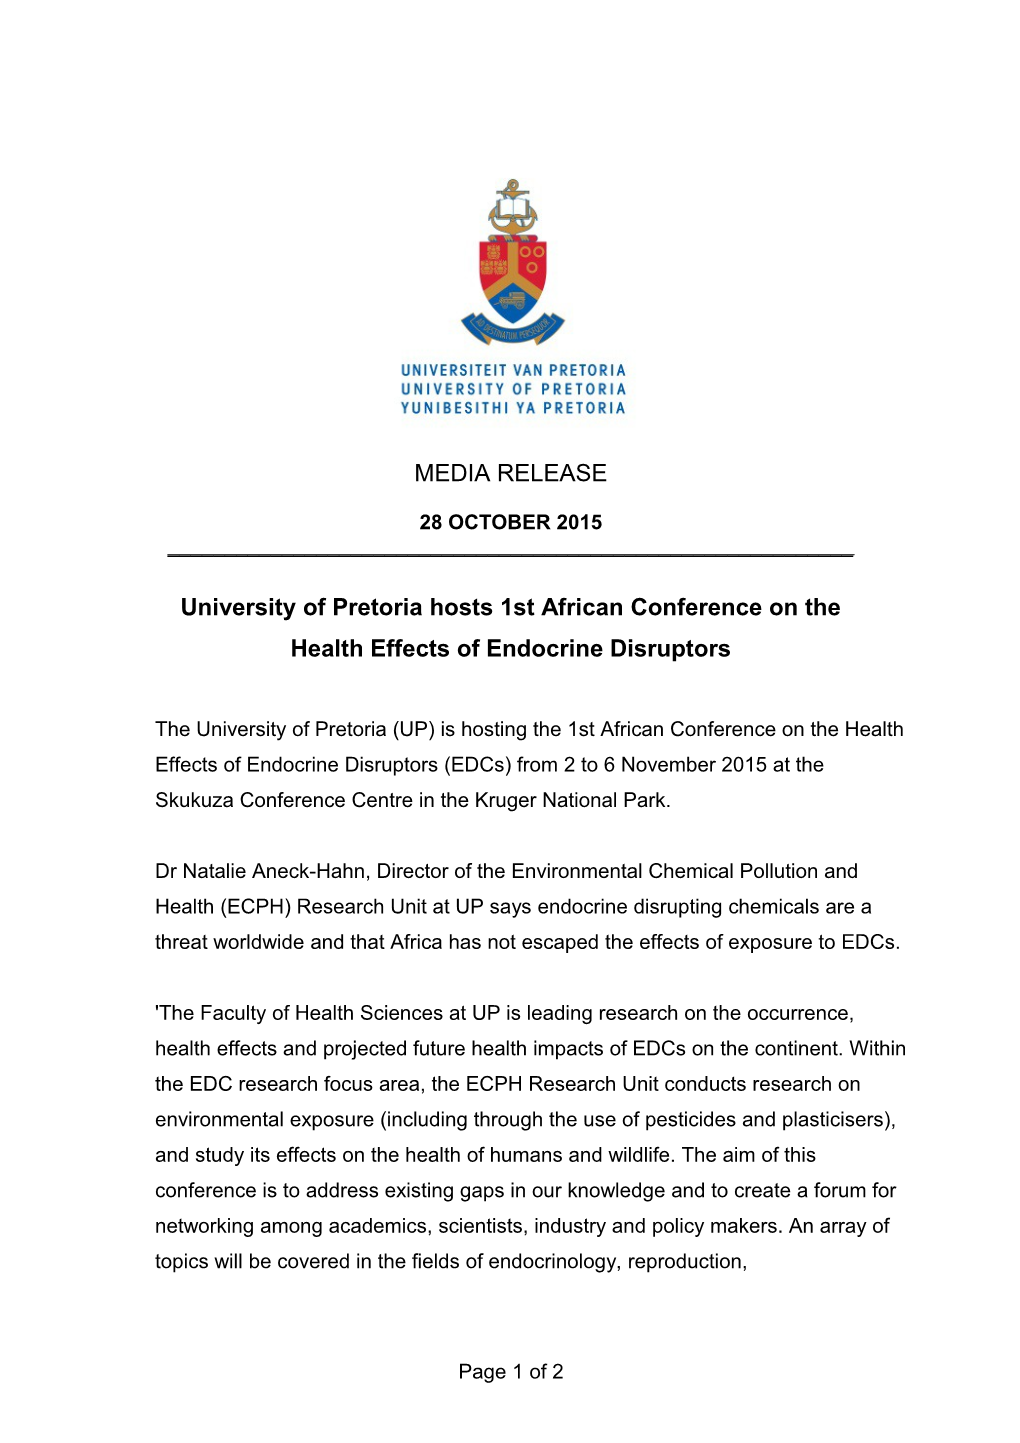 University of Pretoria Hosts 1St African Conference on the Health Effects of Endocrine